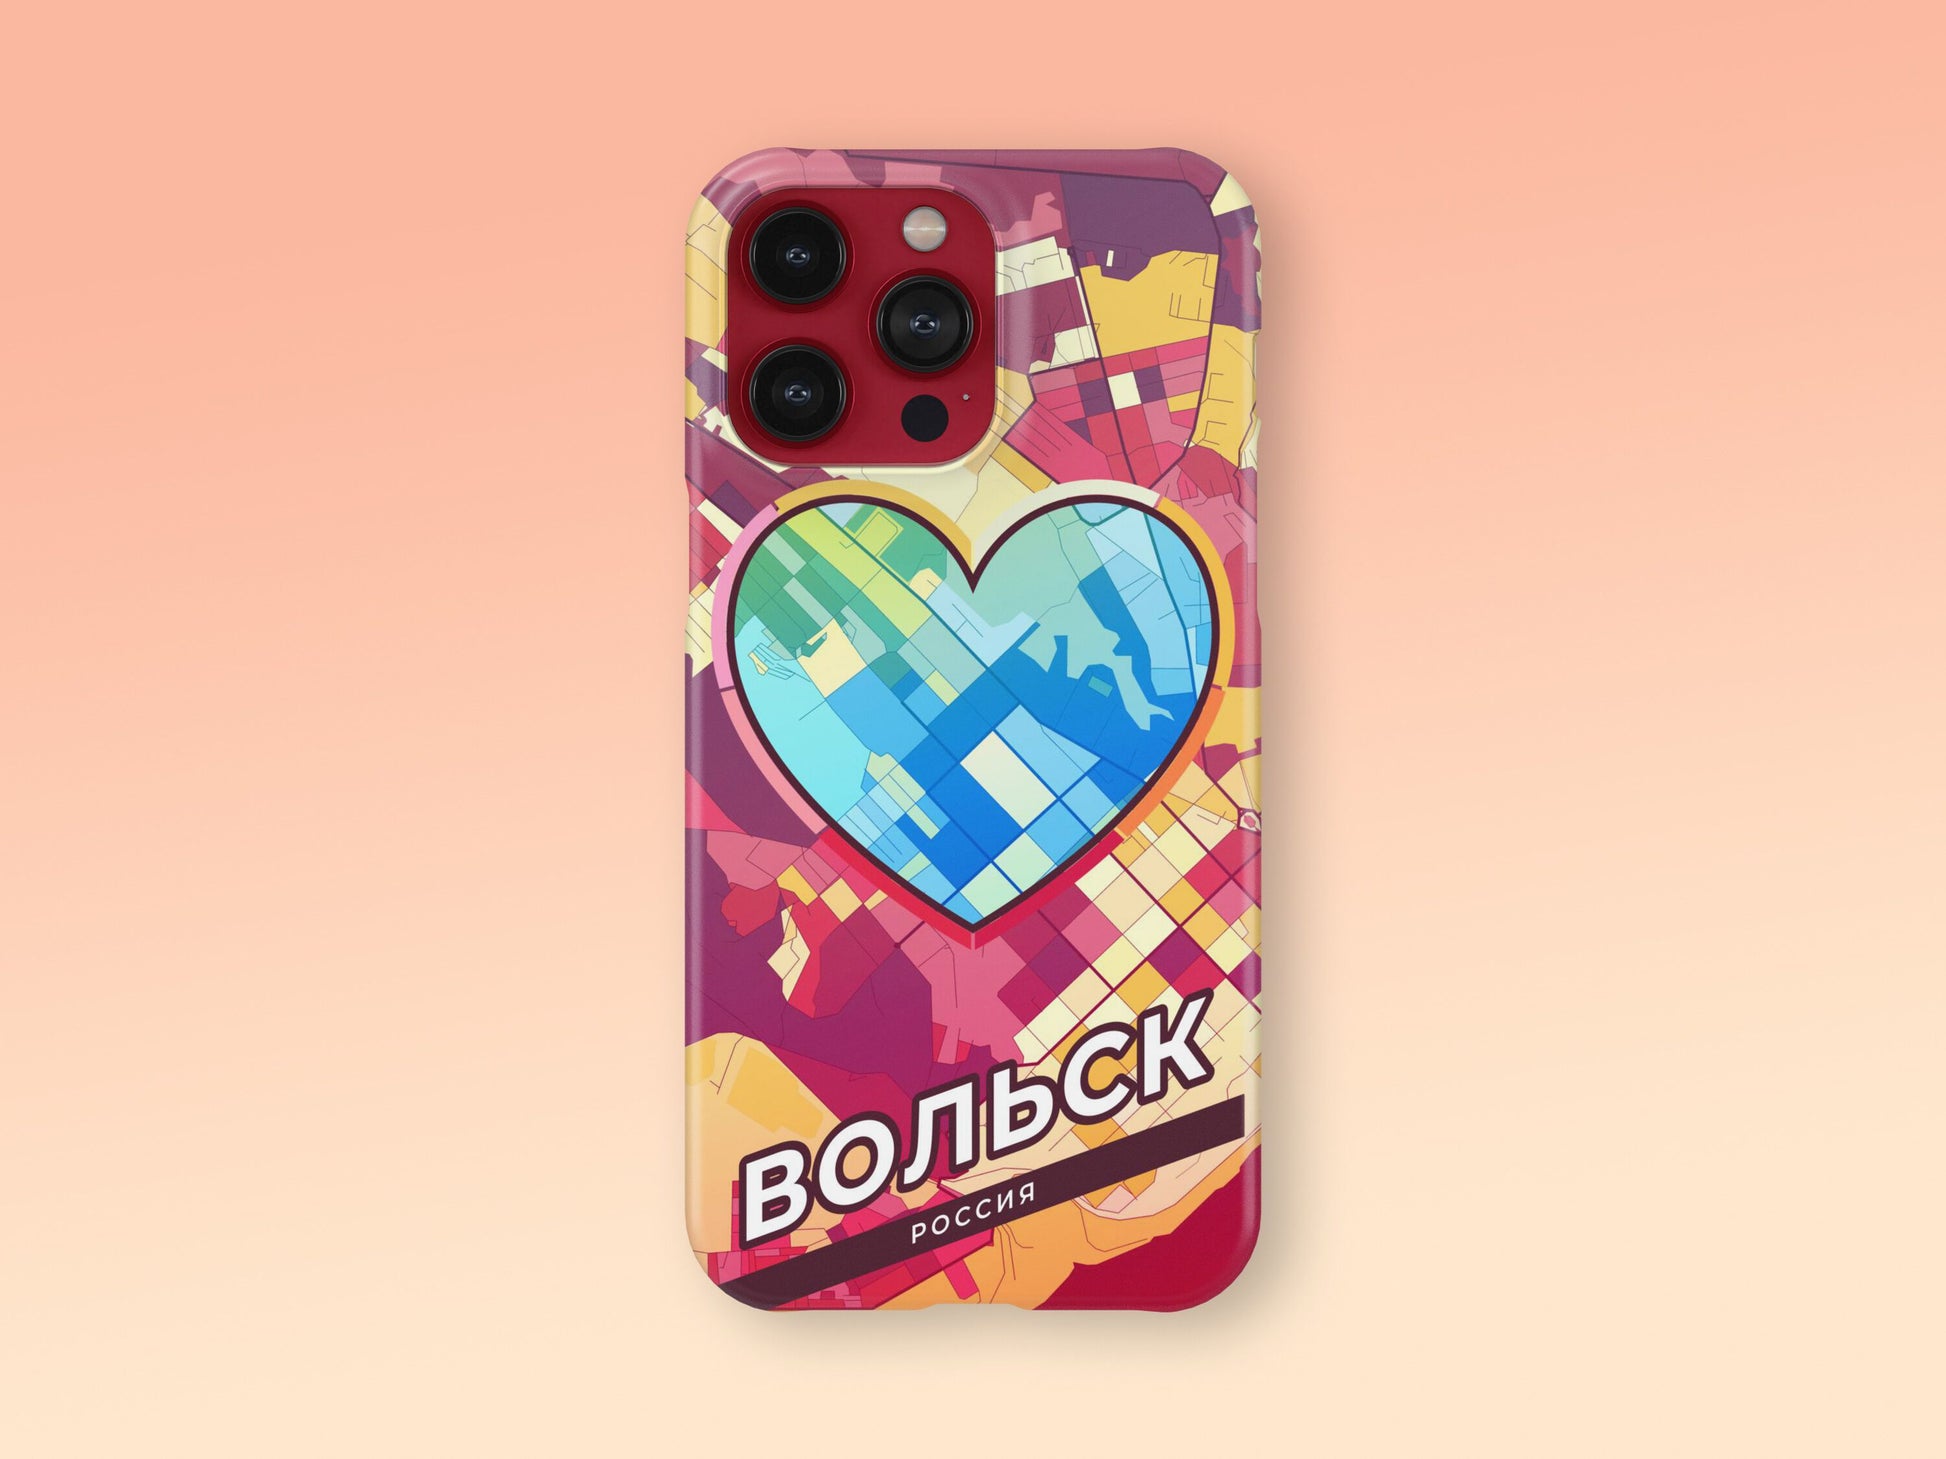 Volsk Russia slim phone case with colorful icon 2